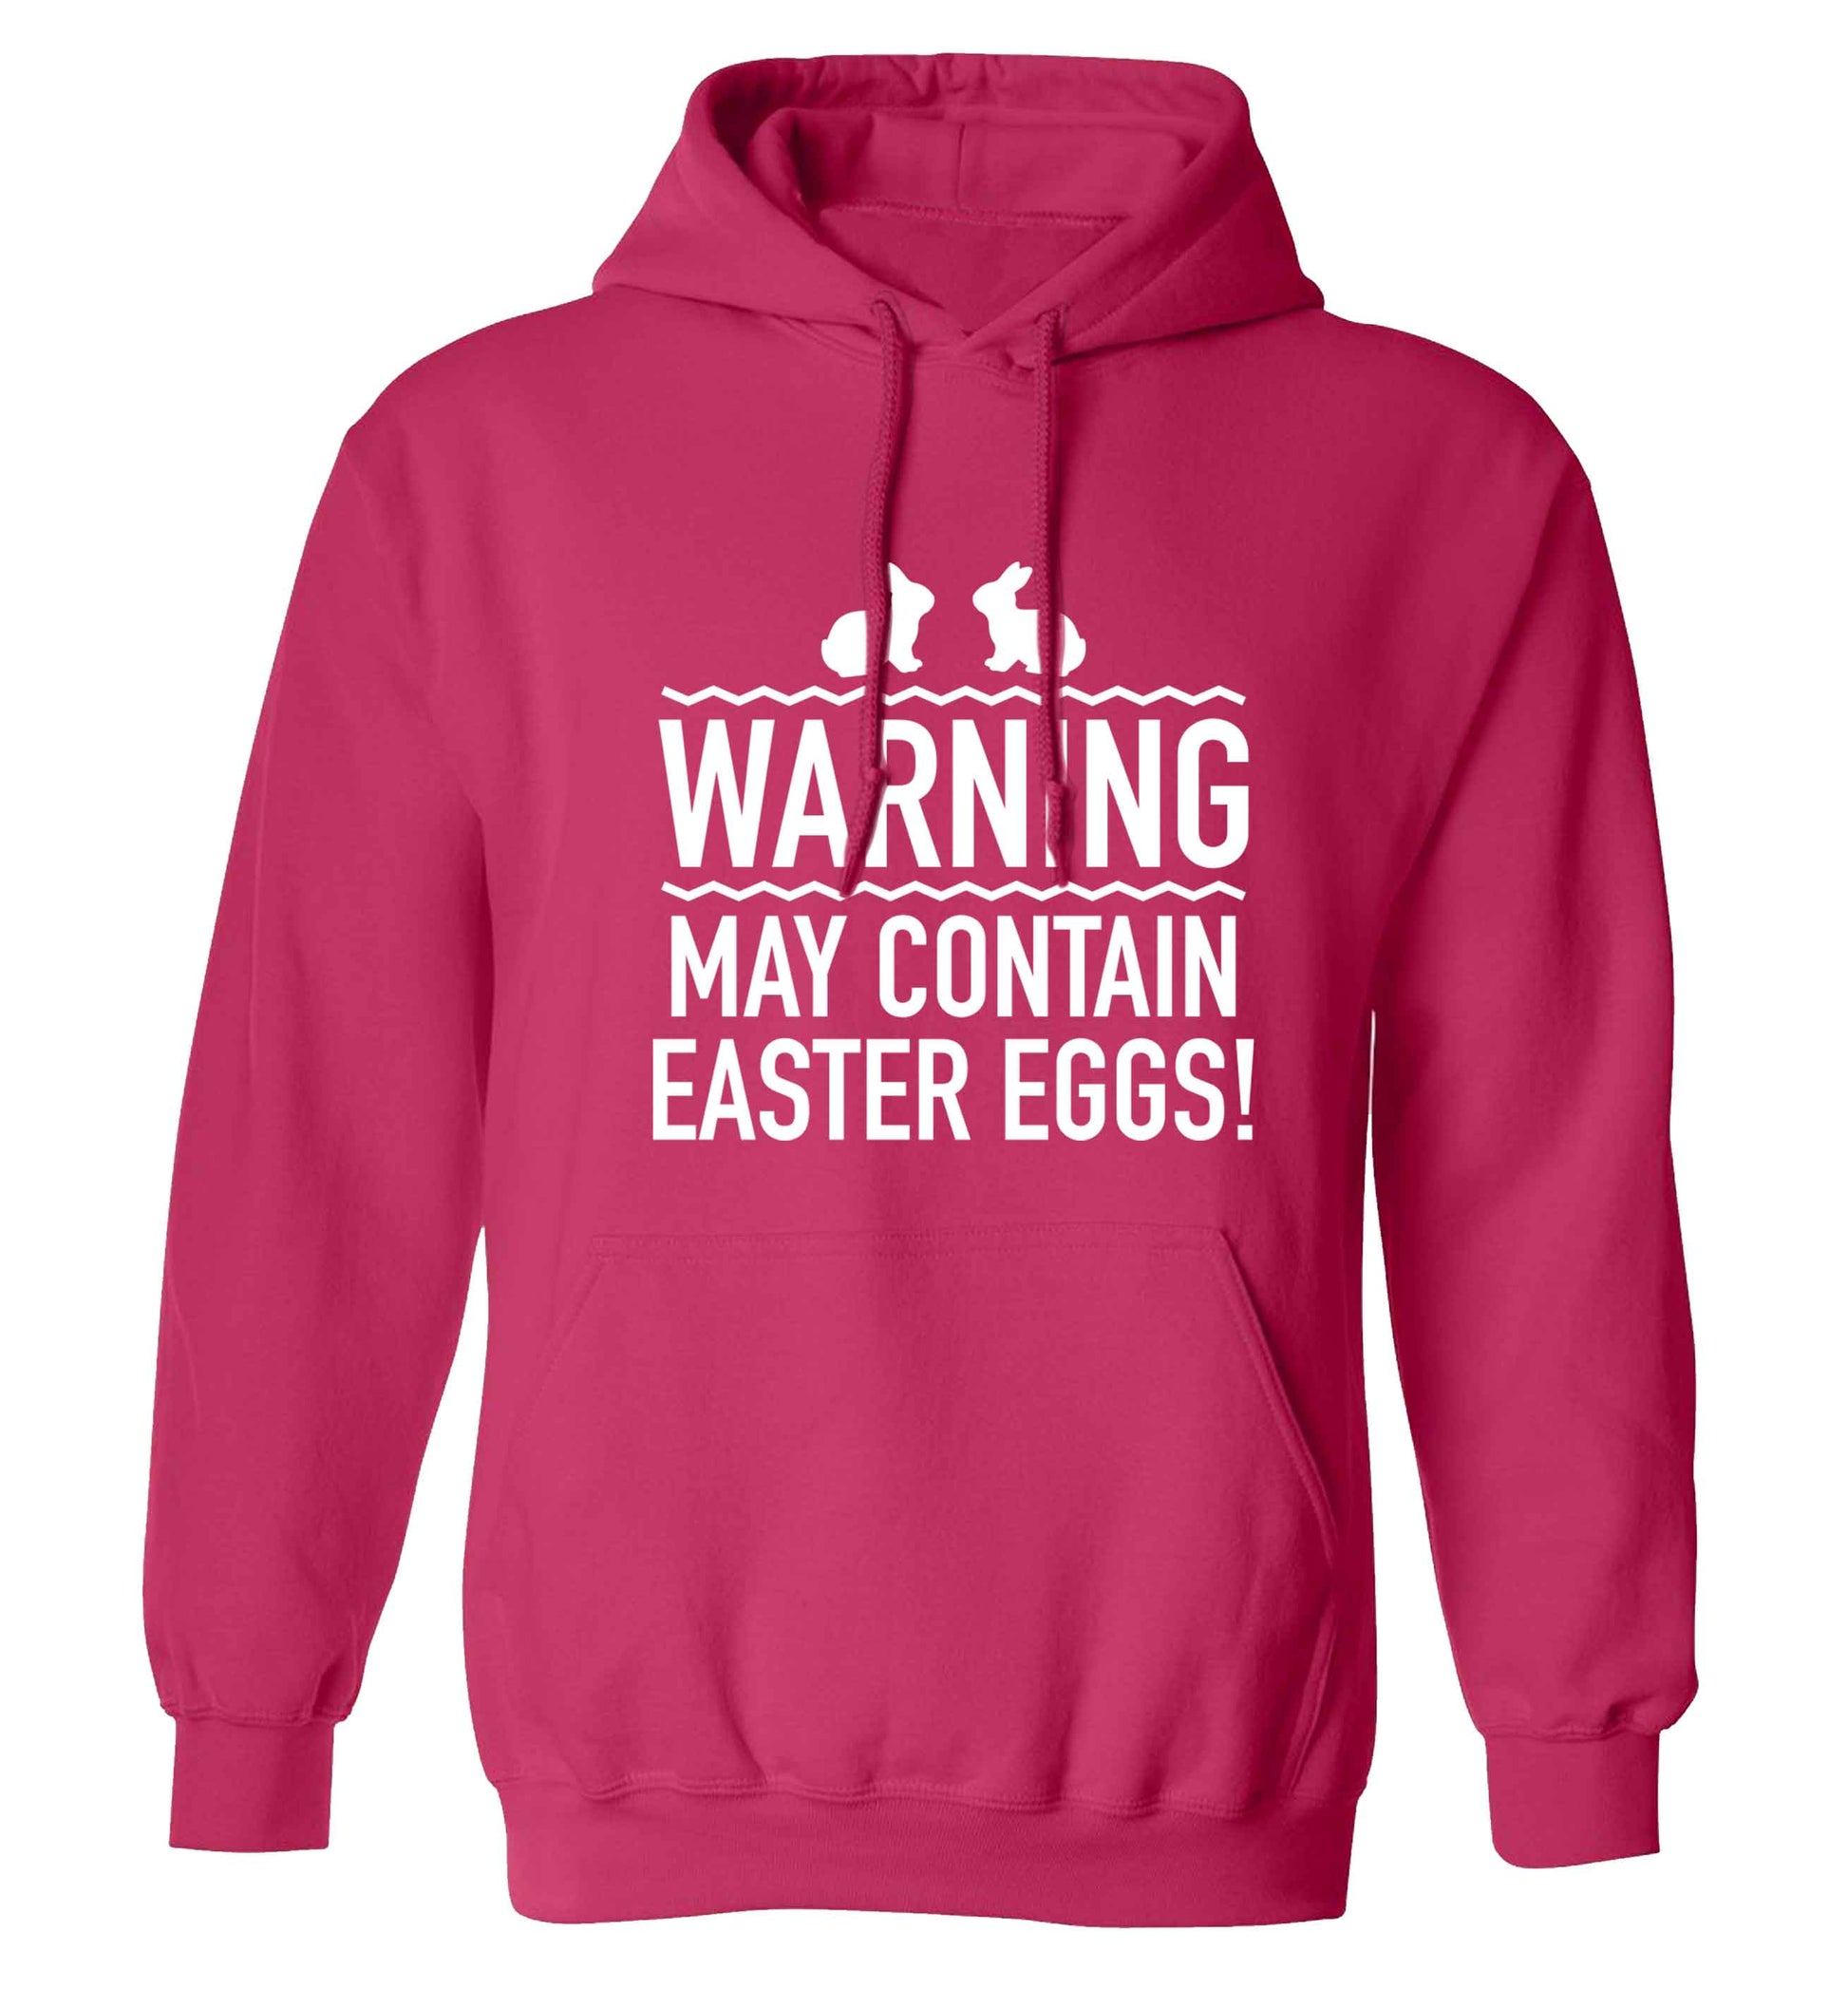 Warning may contain Easter eggs adults unisex pink hoodie 2XL